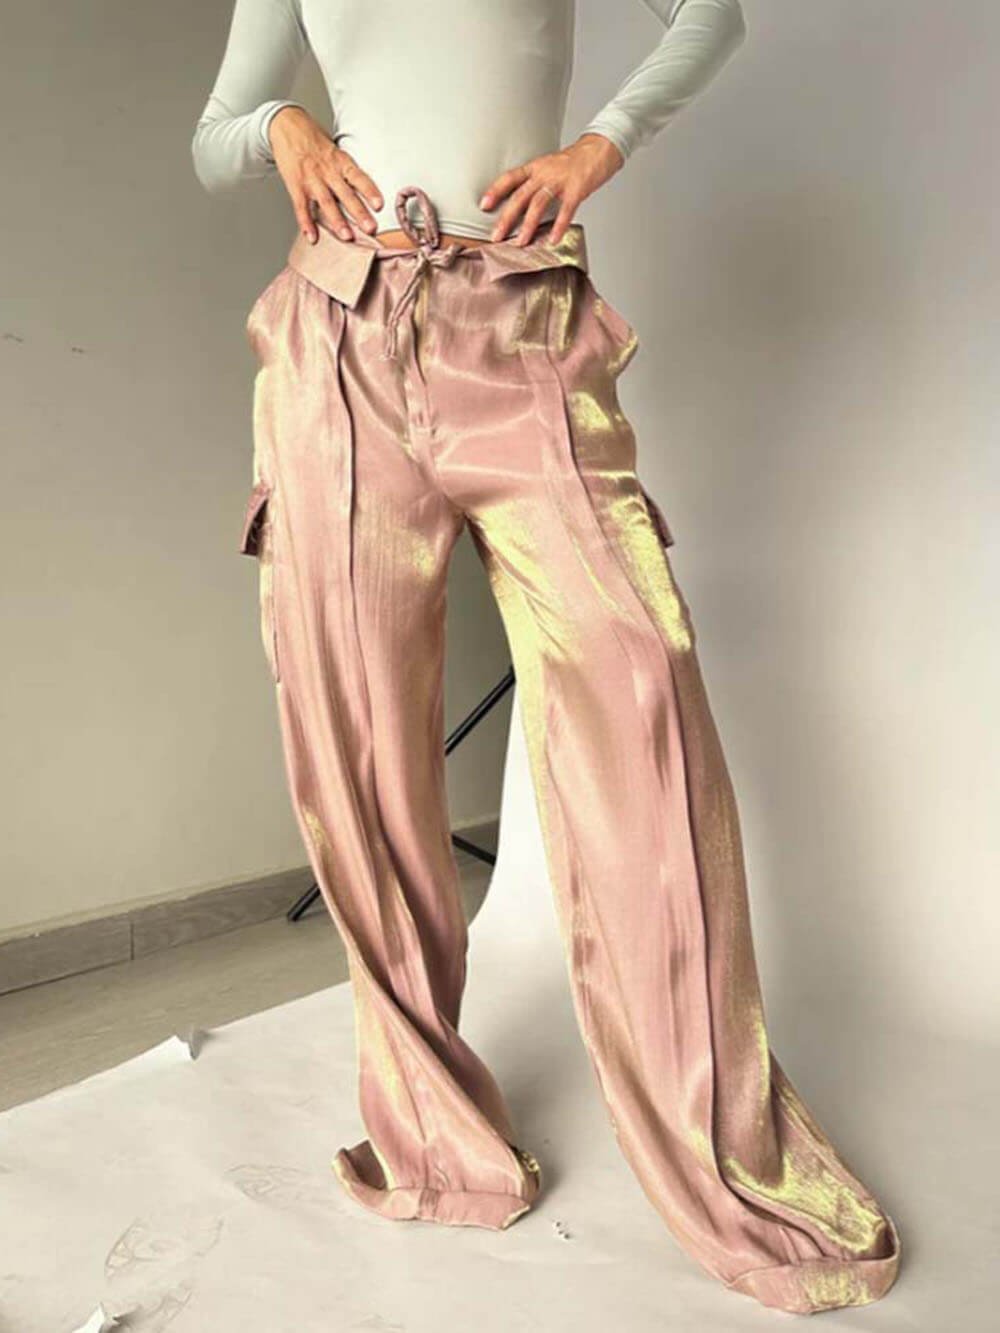 Golden Years Glitter Fabric Drawstring Waist Pocketed Wide Leg Pants - Buy two and get free shipping! mysite